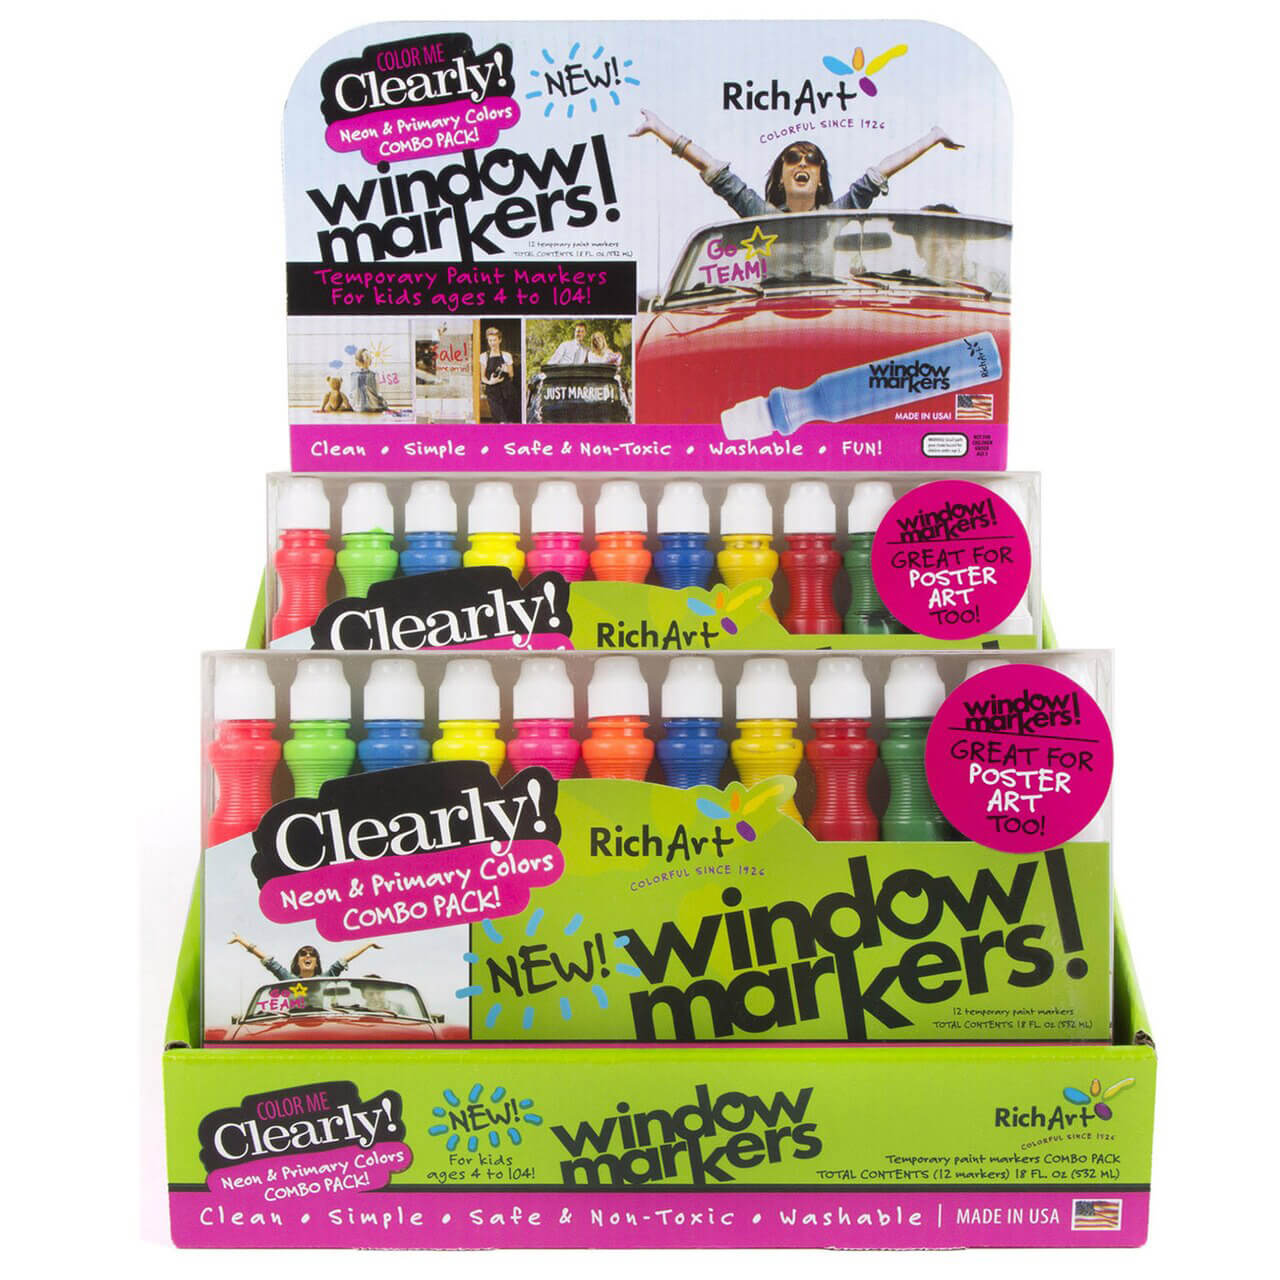 Color Me Clearly” Primary Color Window/Poster Marker 8 Marker Set